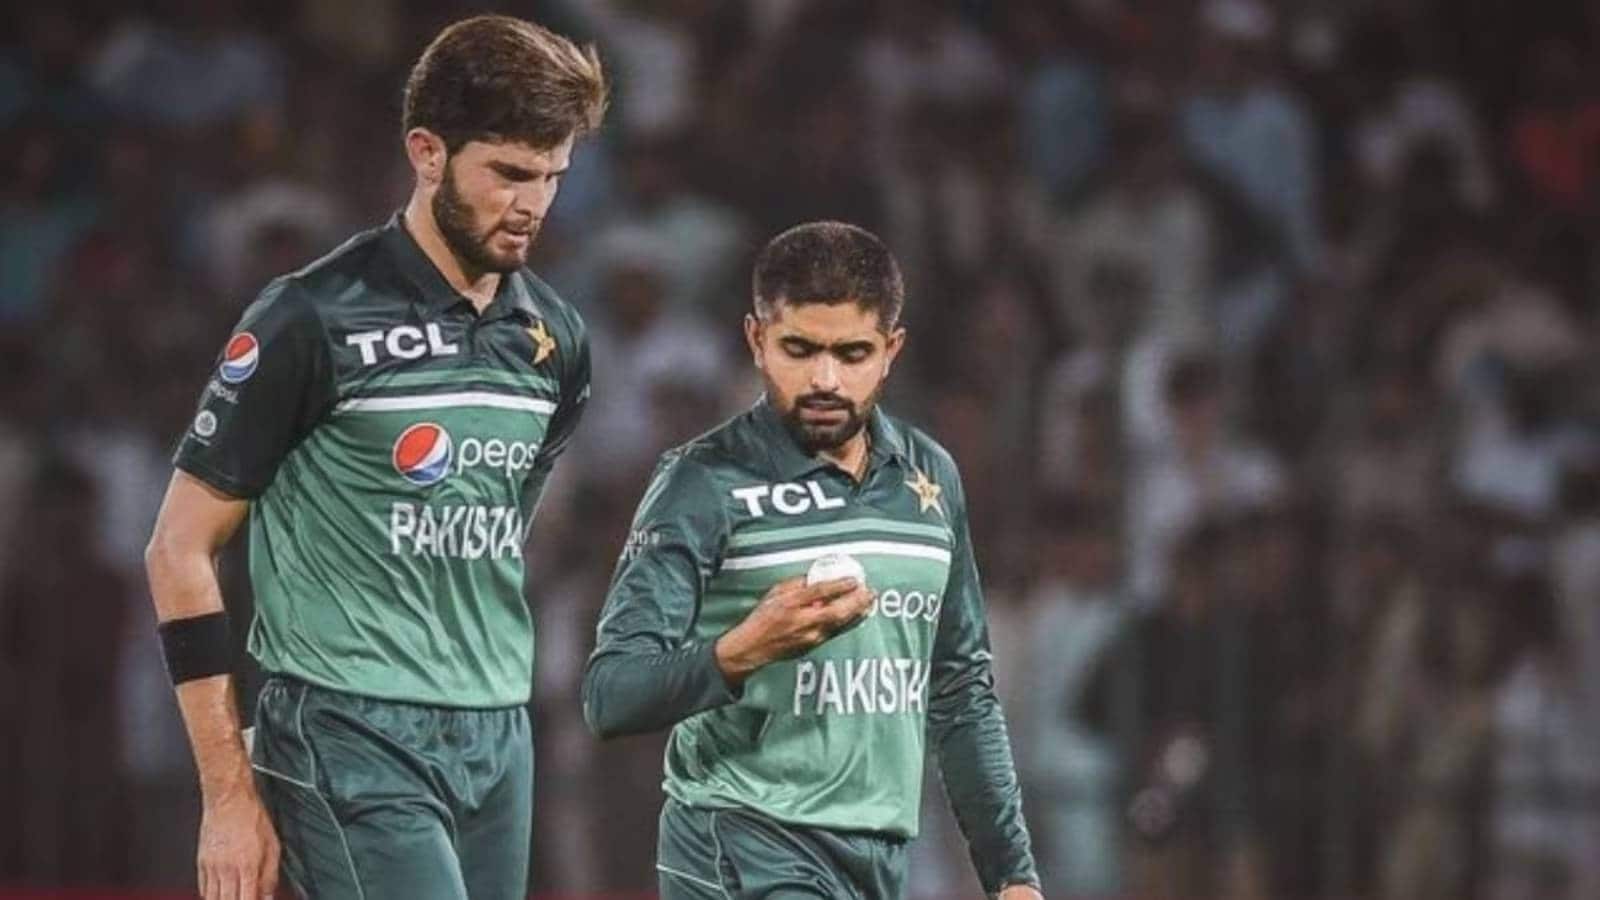 Babar Azam named captain of Pakistan's white-ball team for T20 World Cup, replacing Shaheen Afridi